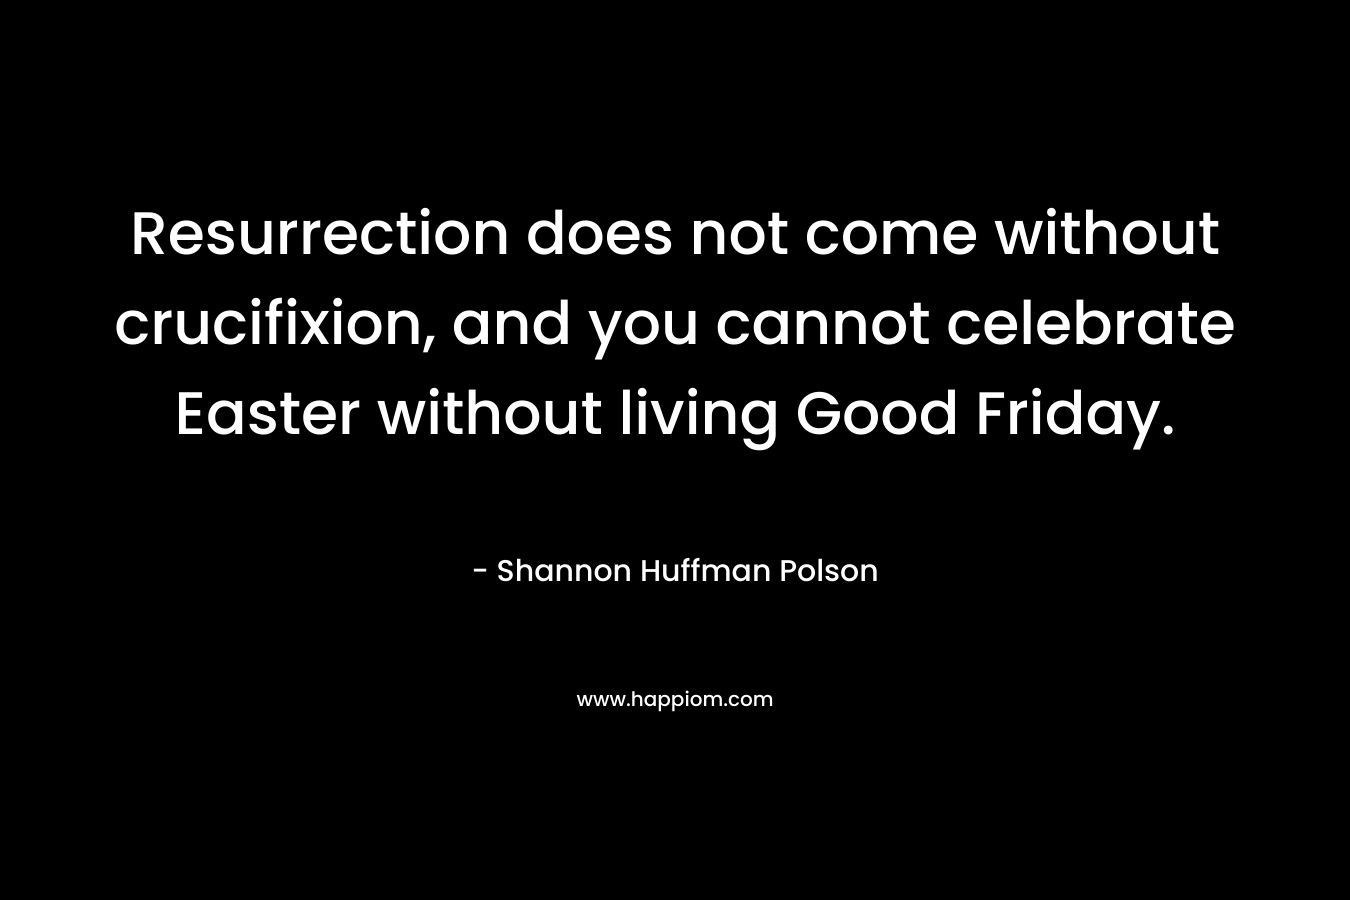 Resurrection does not come without crucifixion, and you cannot celebrate Easter without living Good Friday.